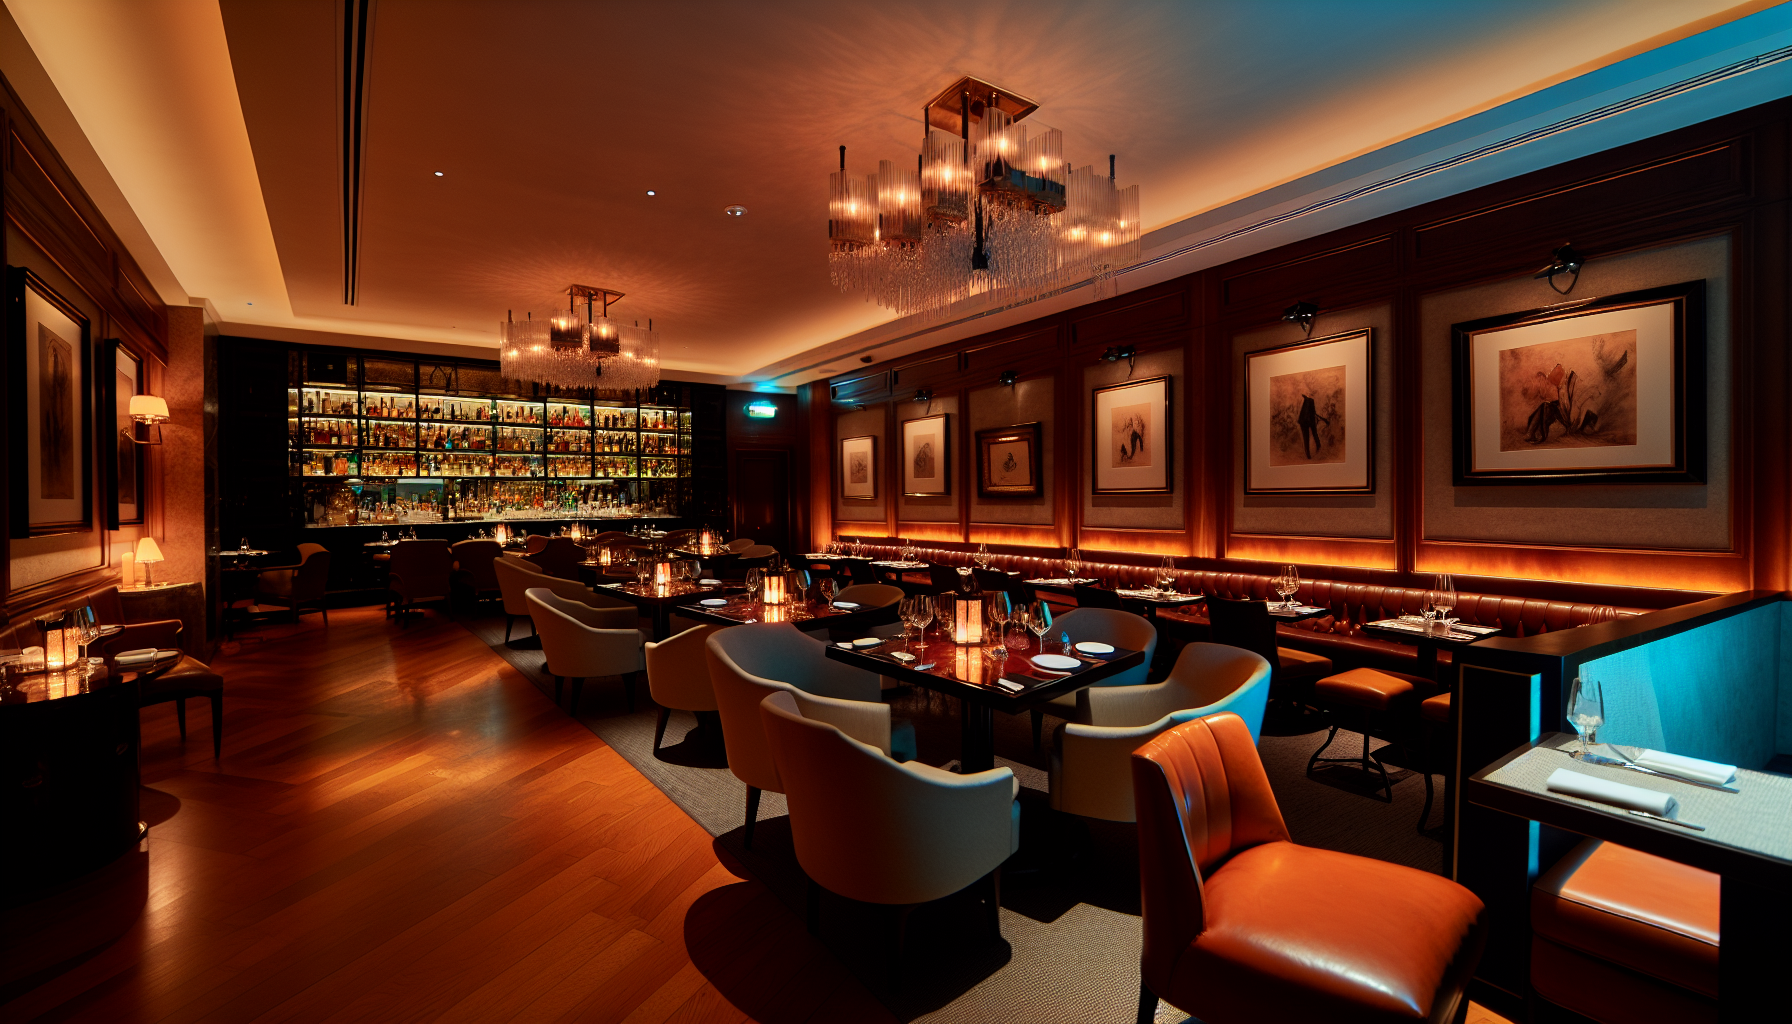 Upscale ambiance at Morton's The Steakhouse